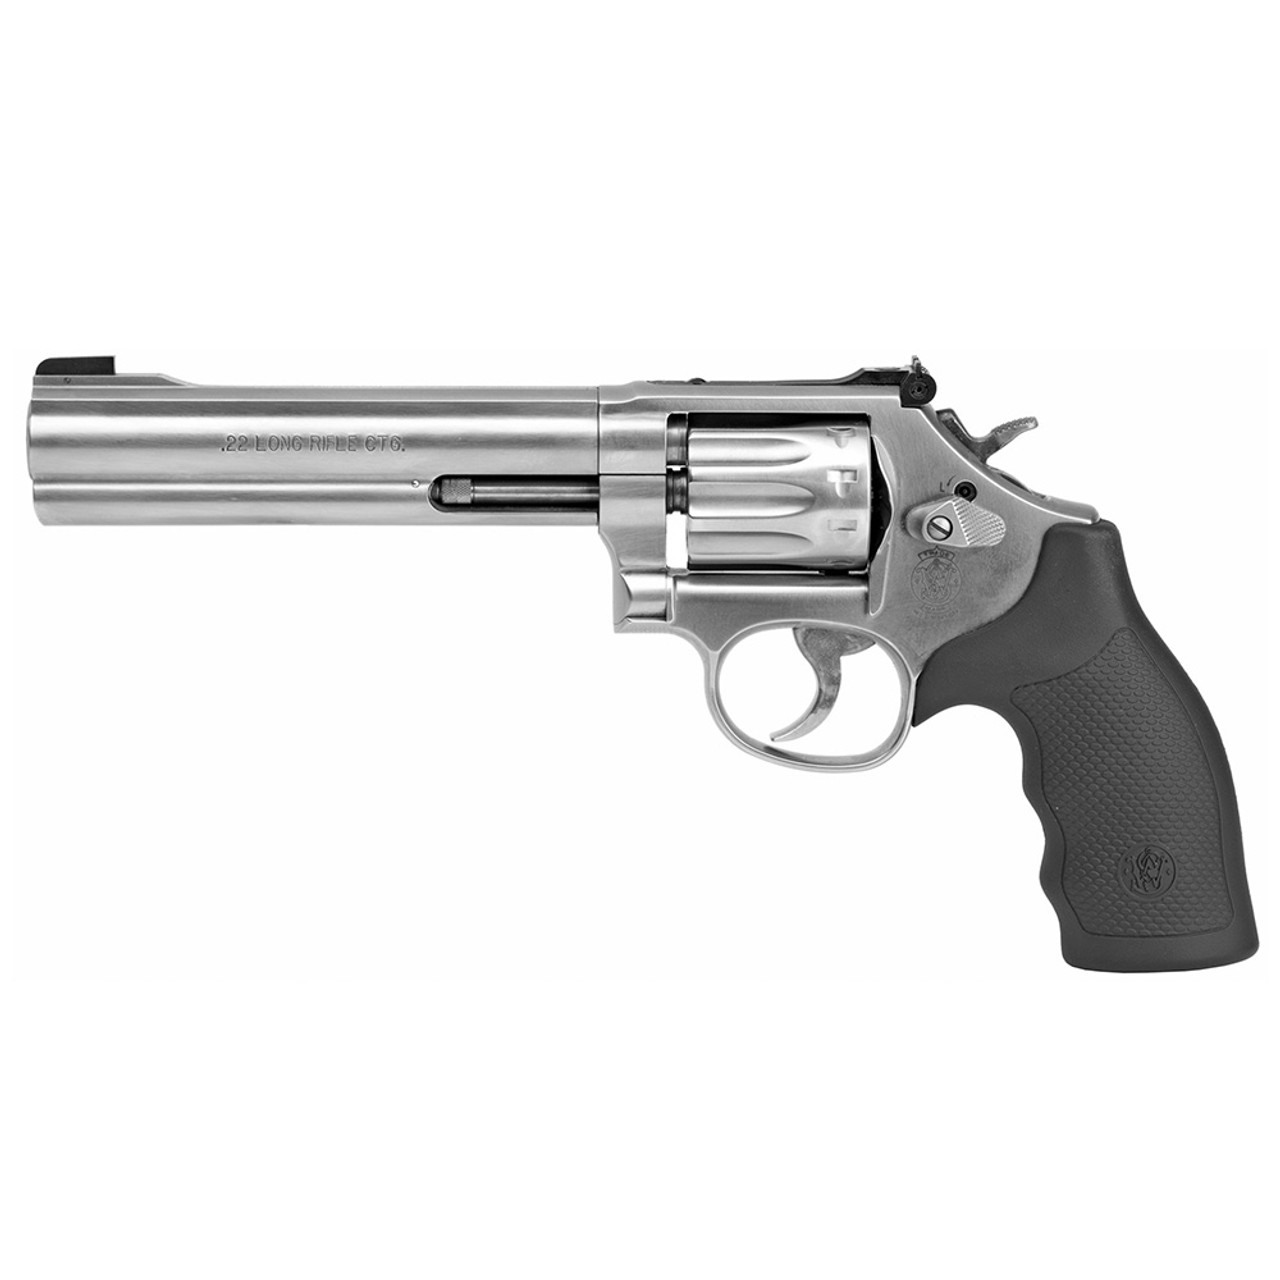 Smith & Wesson Model 617 CALIFORNIA LEGAL - .22 LR - Stainless